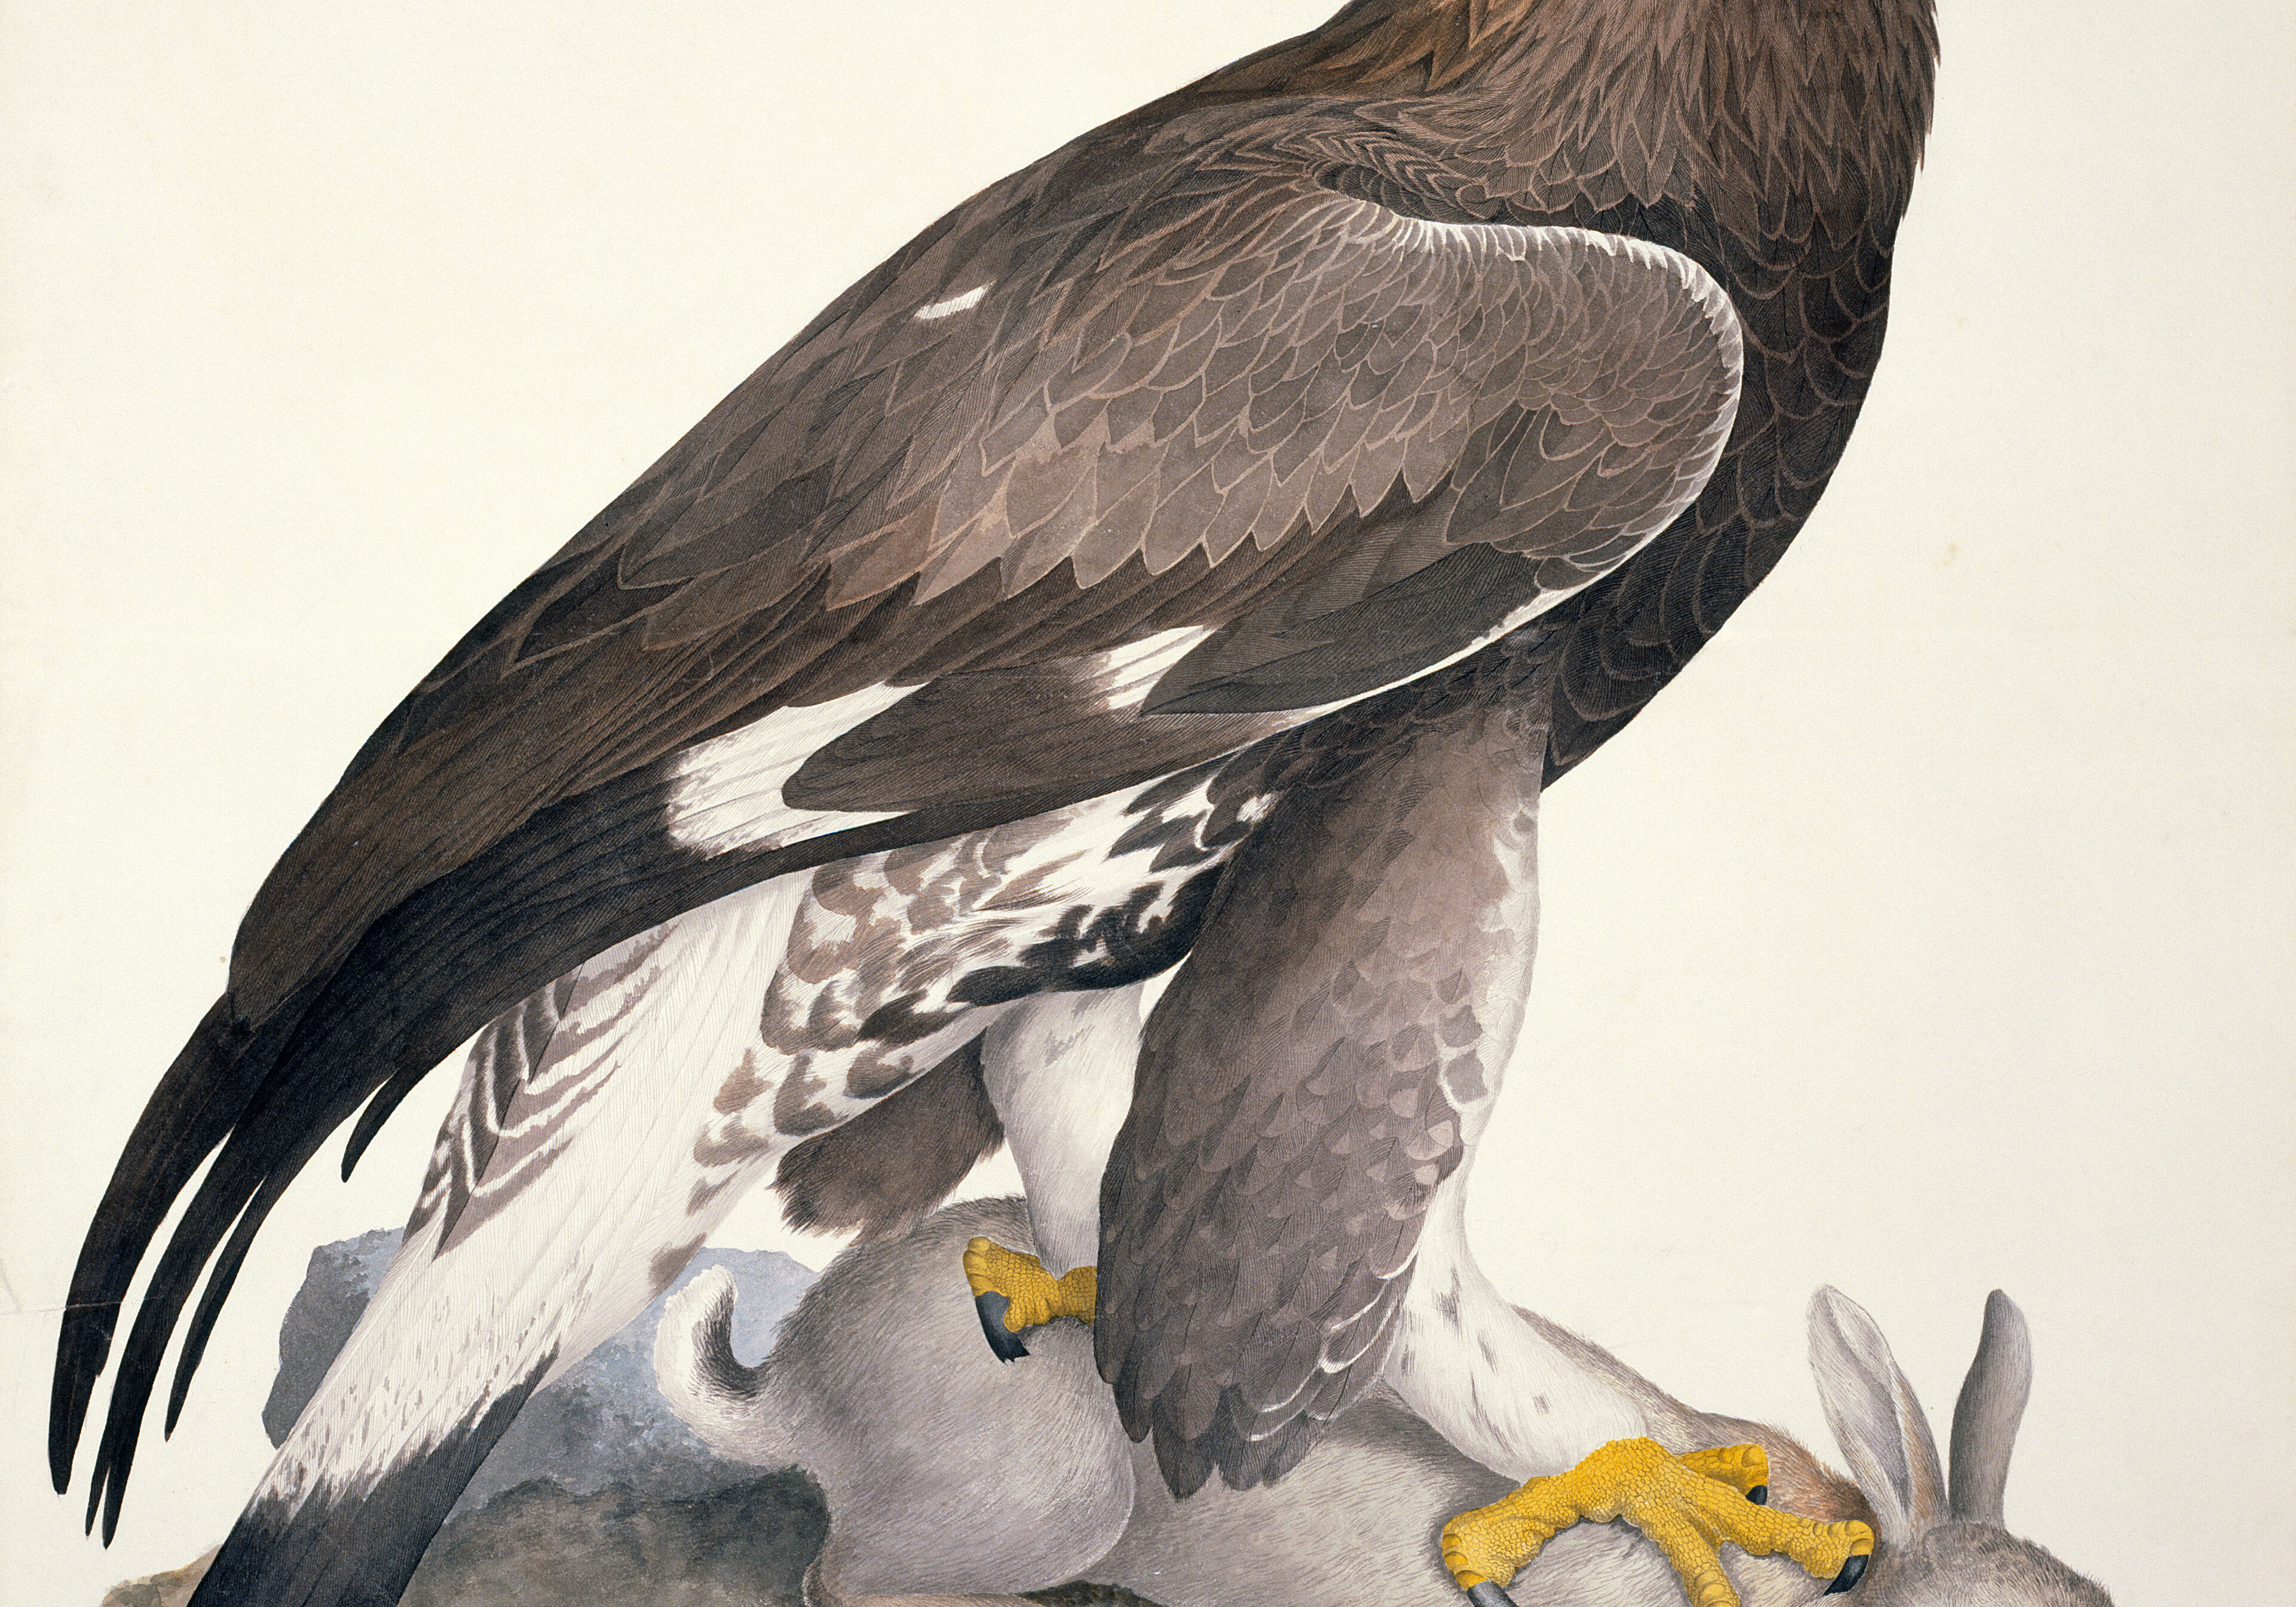 William MacGillivray’s 19th century  watercolour Golden Eagle with its prey